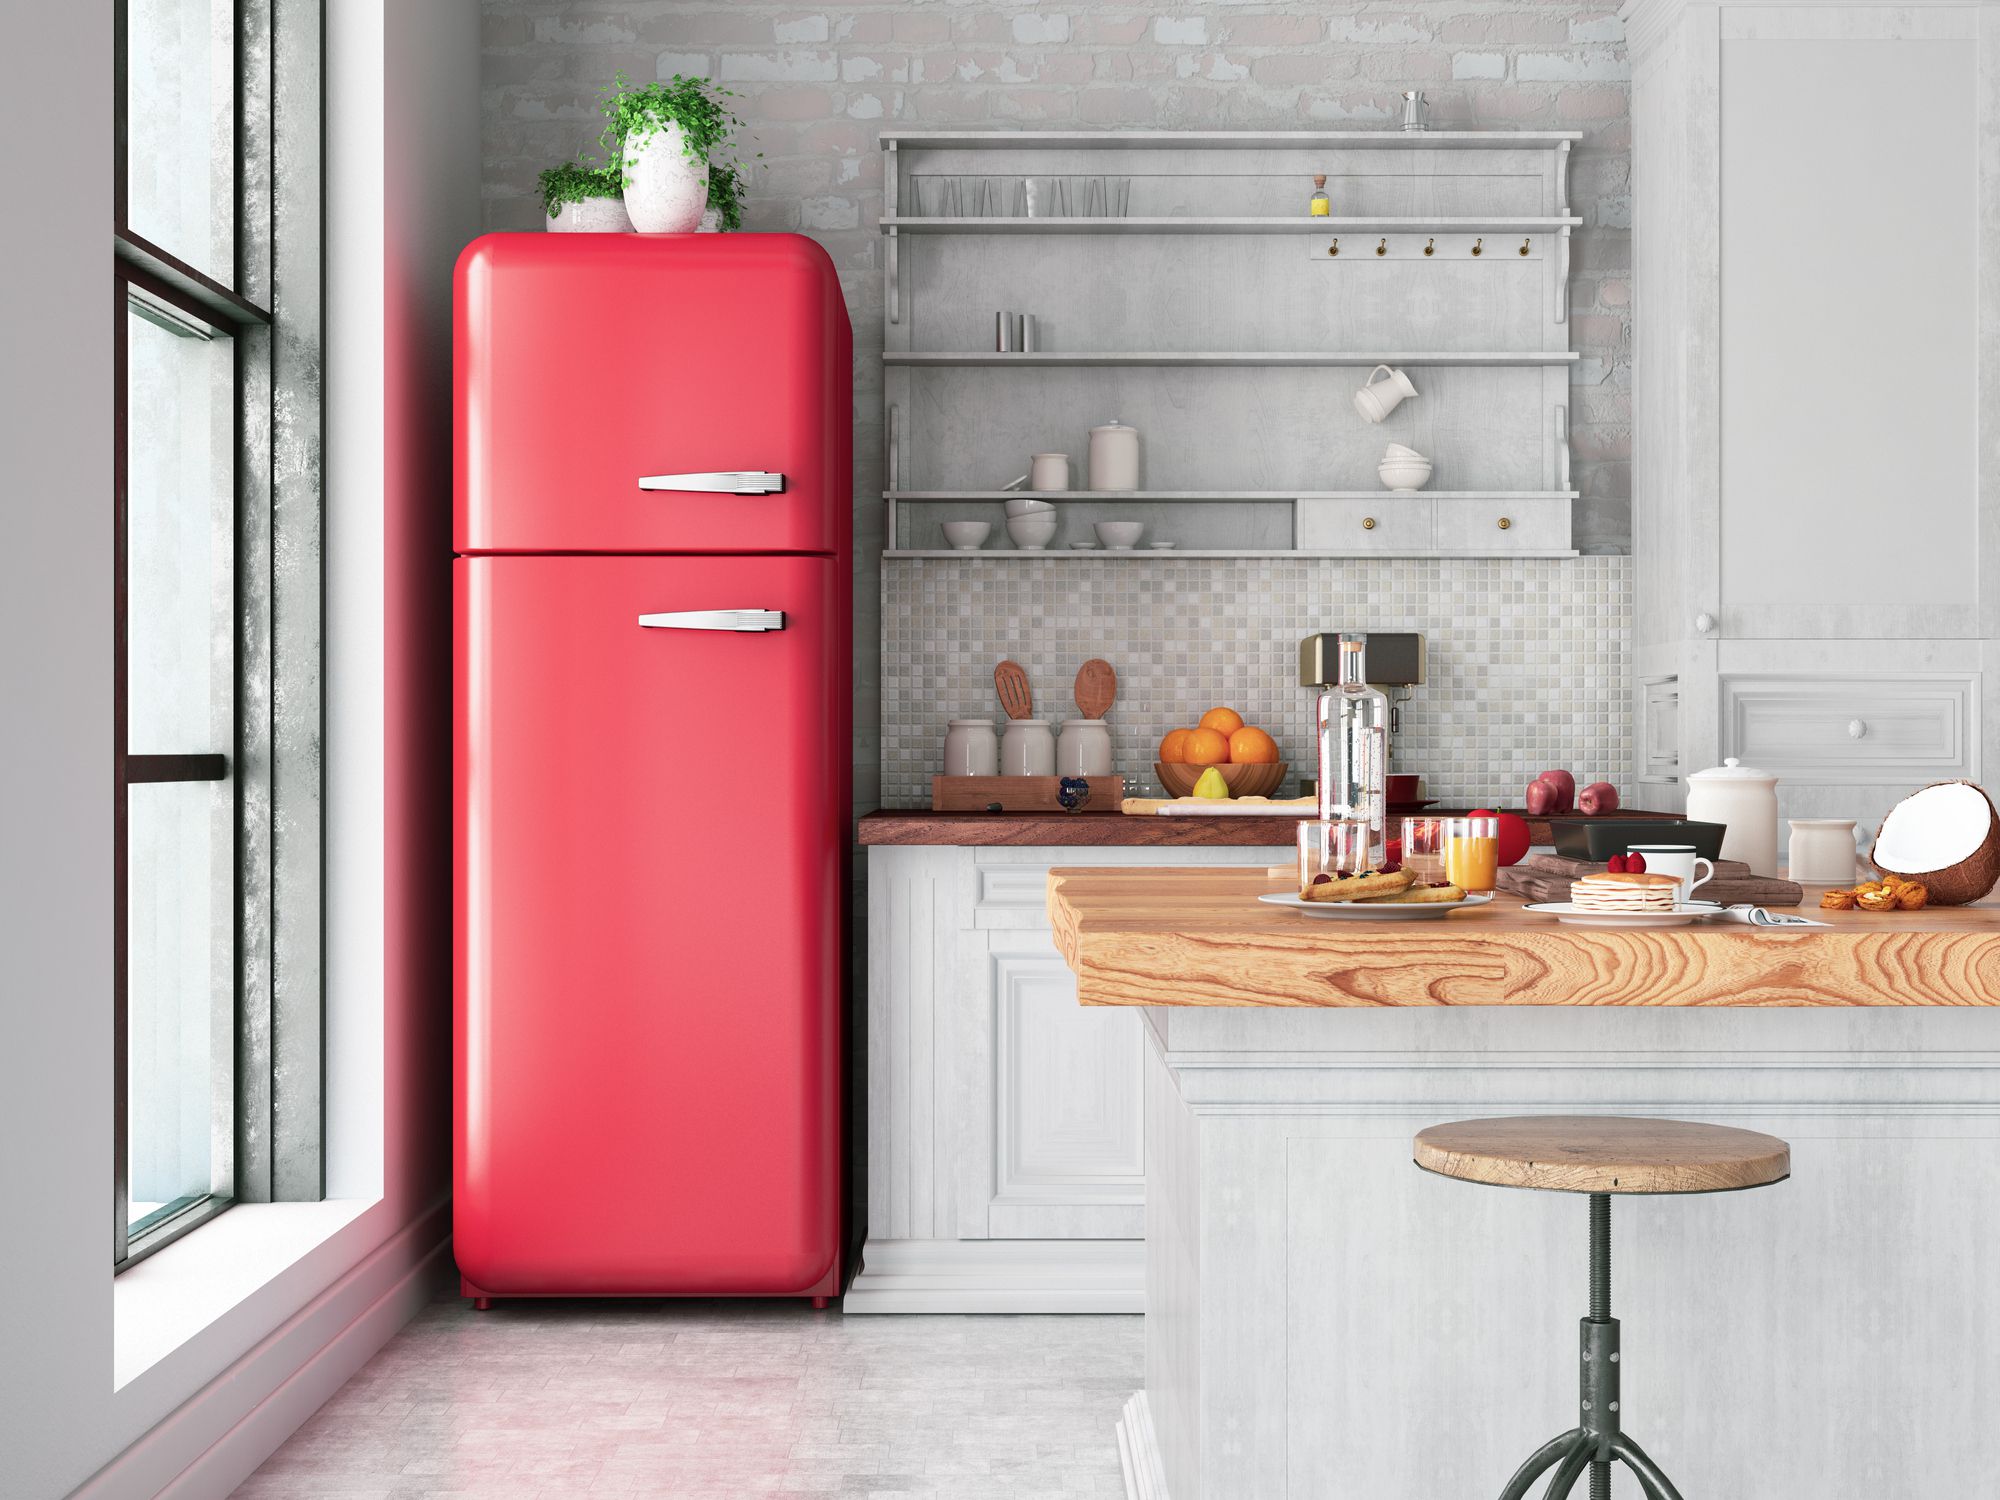 The Best Refrigerator Brands for Your Home and Lifestyle